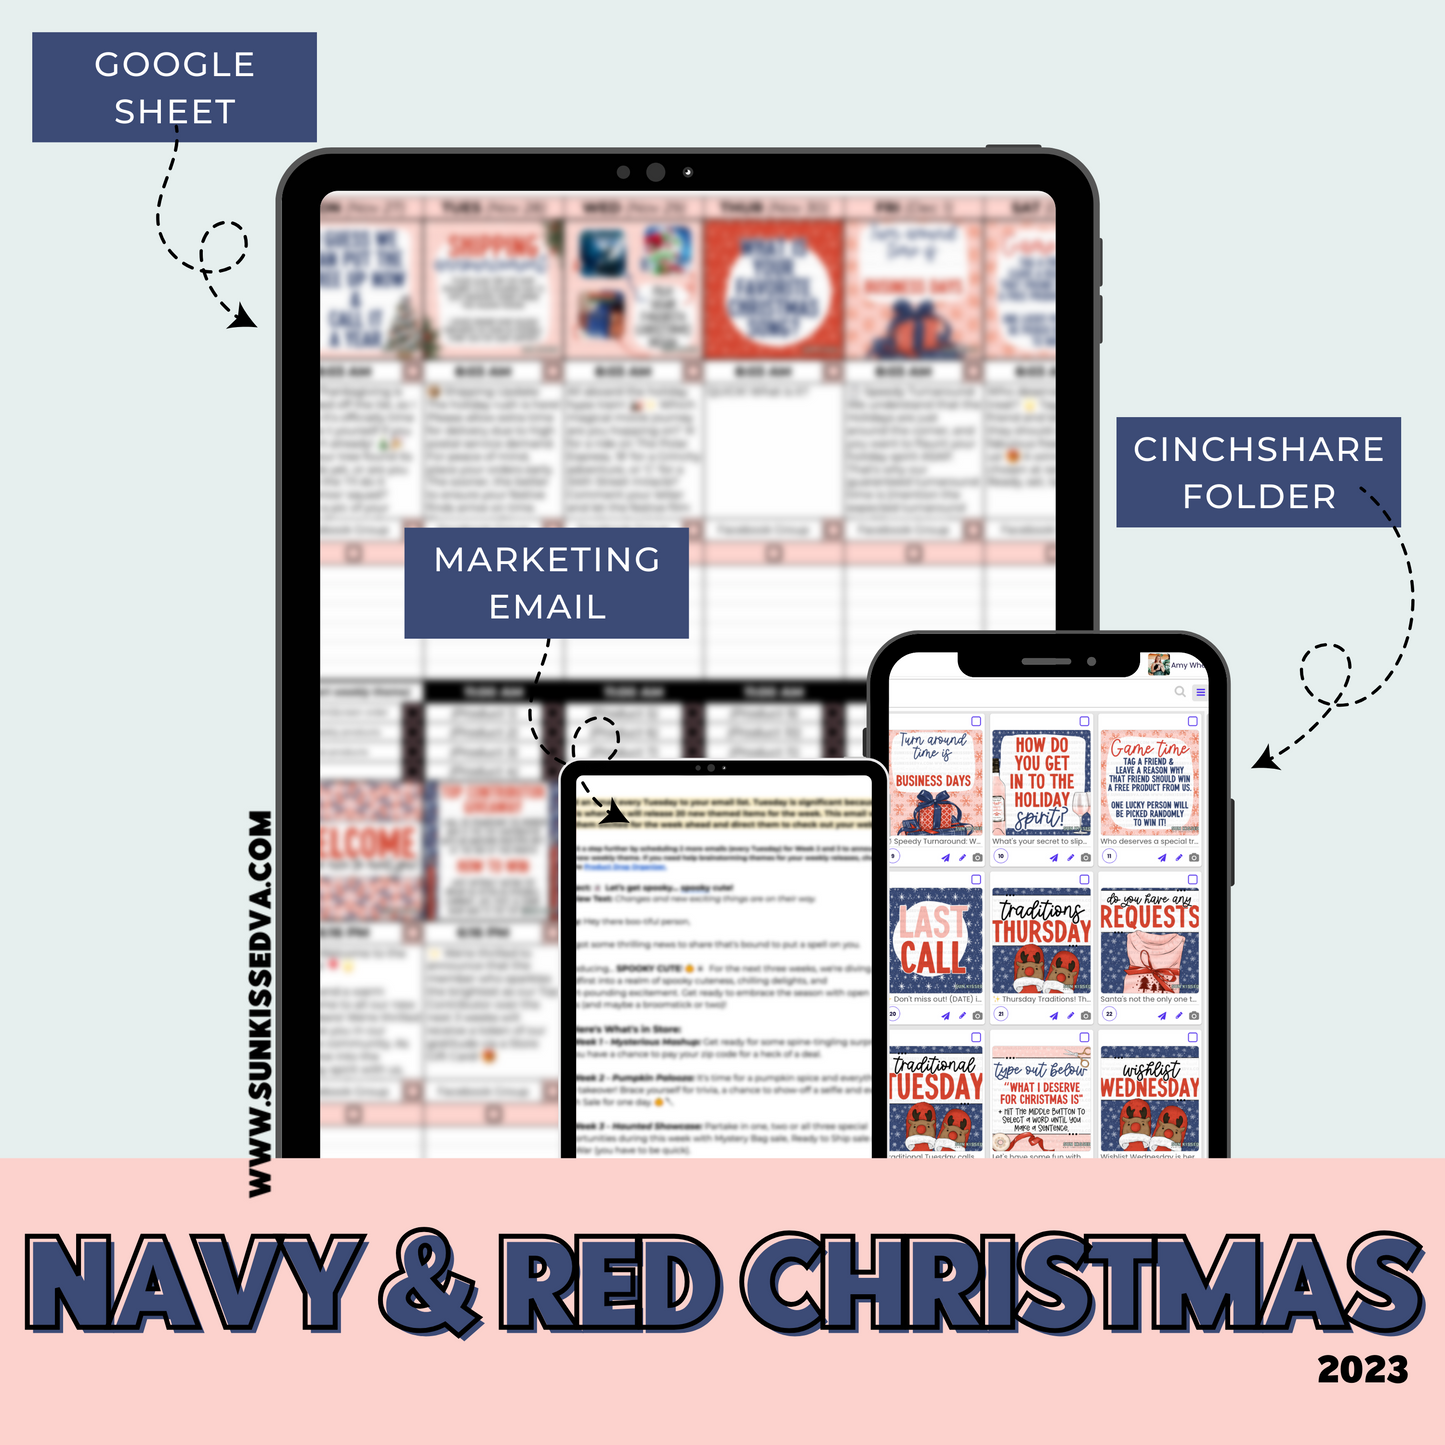 Navy & Red Christmas Content Calendar themed social media plan | Sun Kissed Virtual Assistant